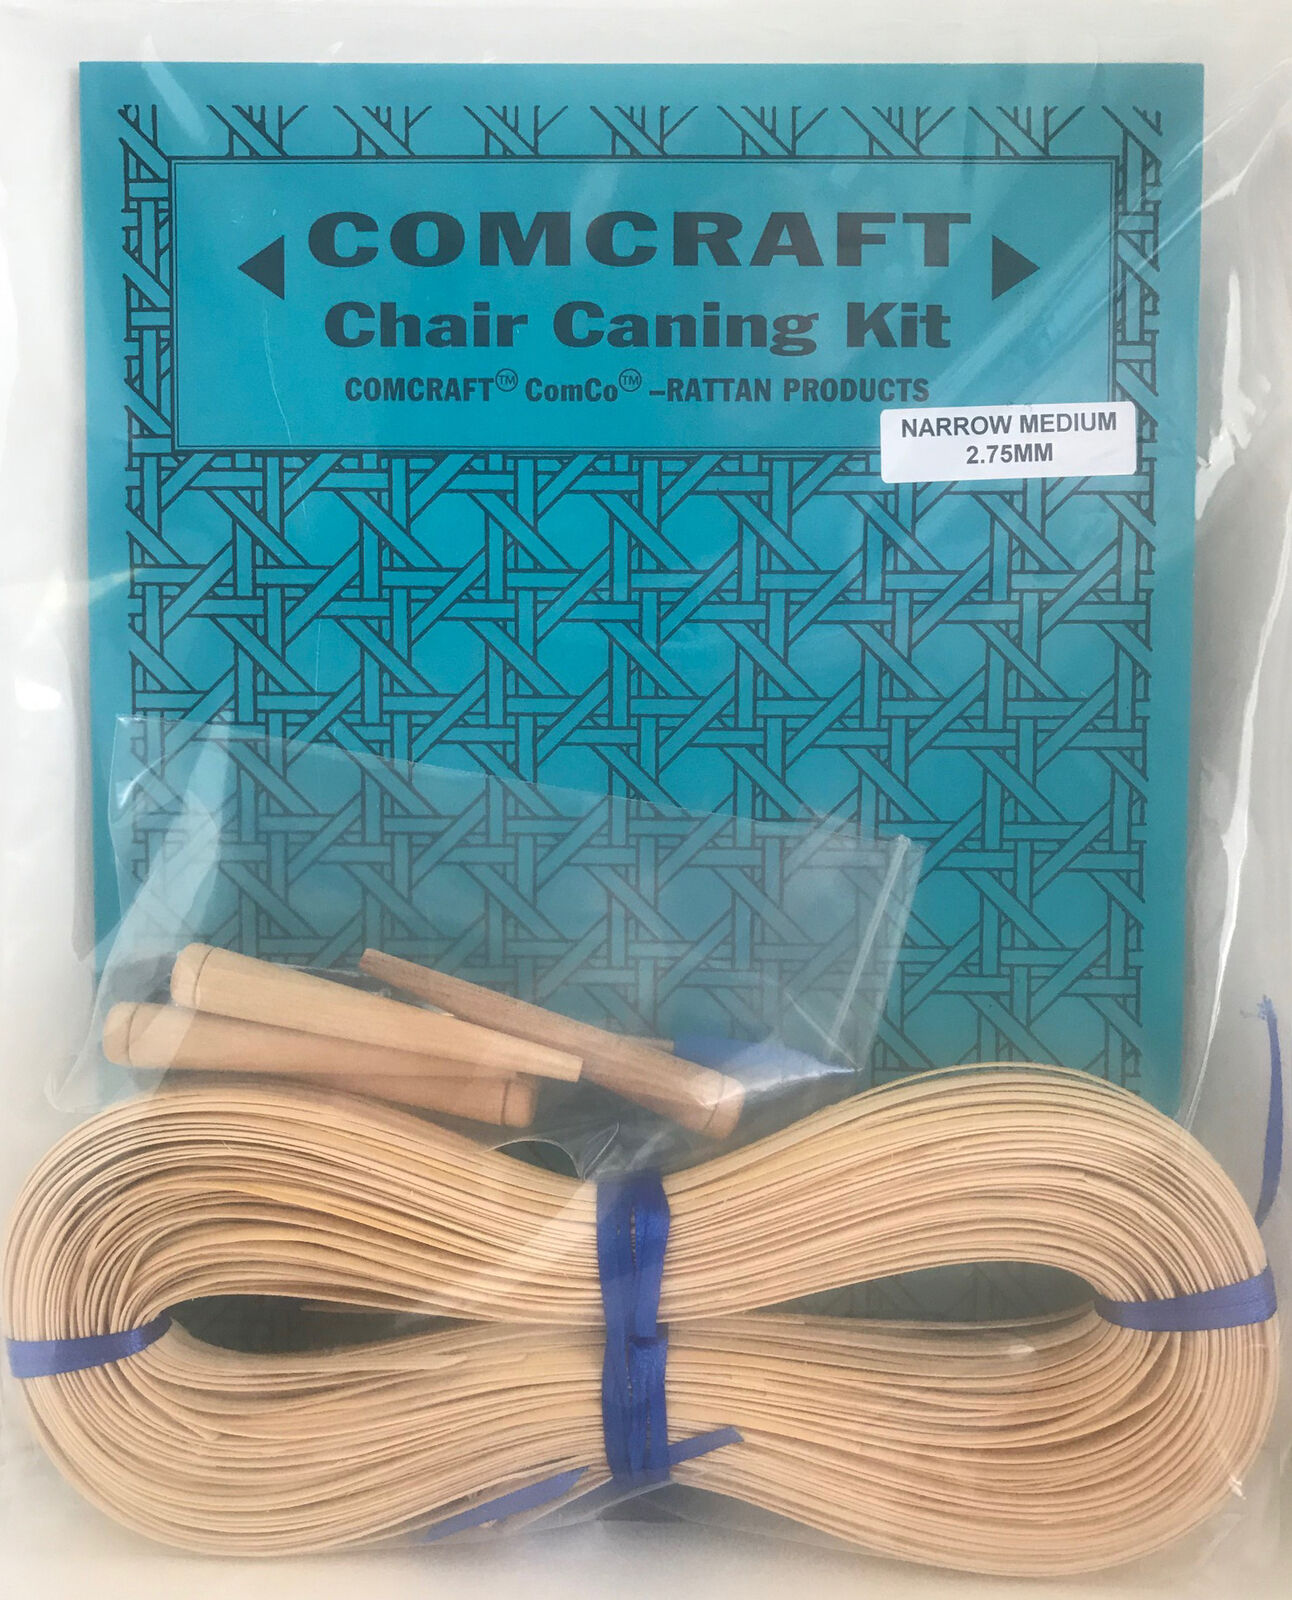 Max 43% OFF Commonwealth Basket Comcraft Chair 2.75 Caning Kit-Narrow Medium Ranking TOP17